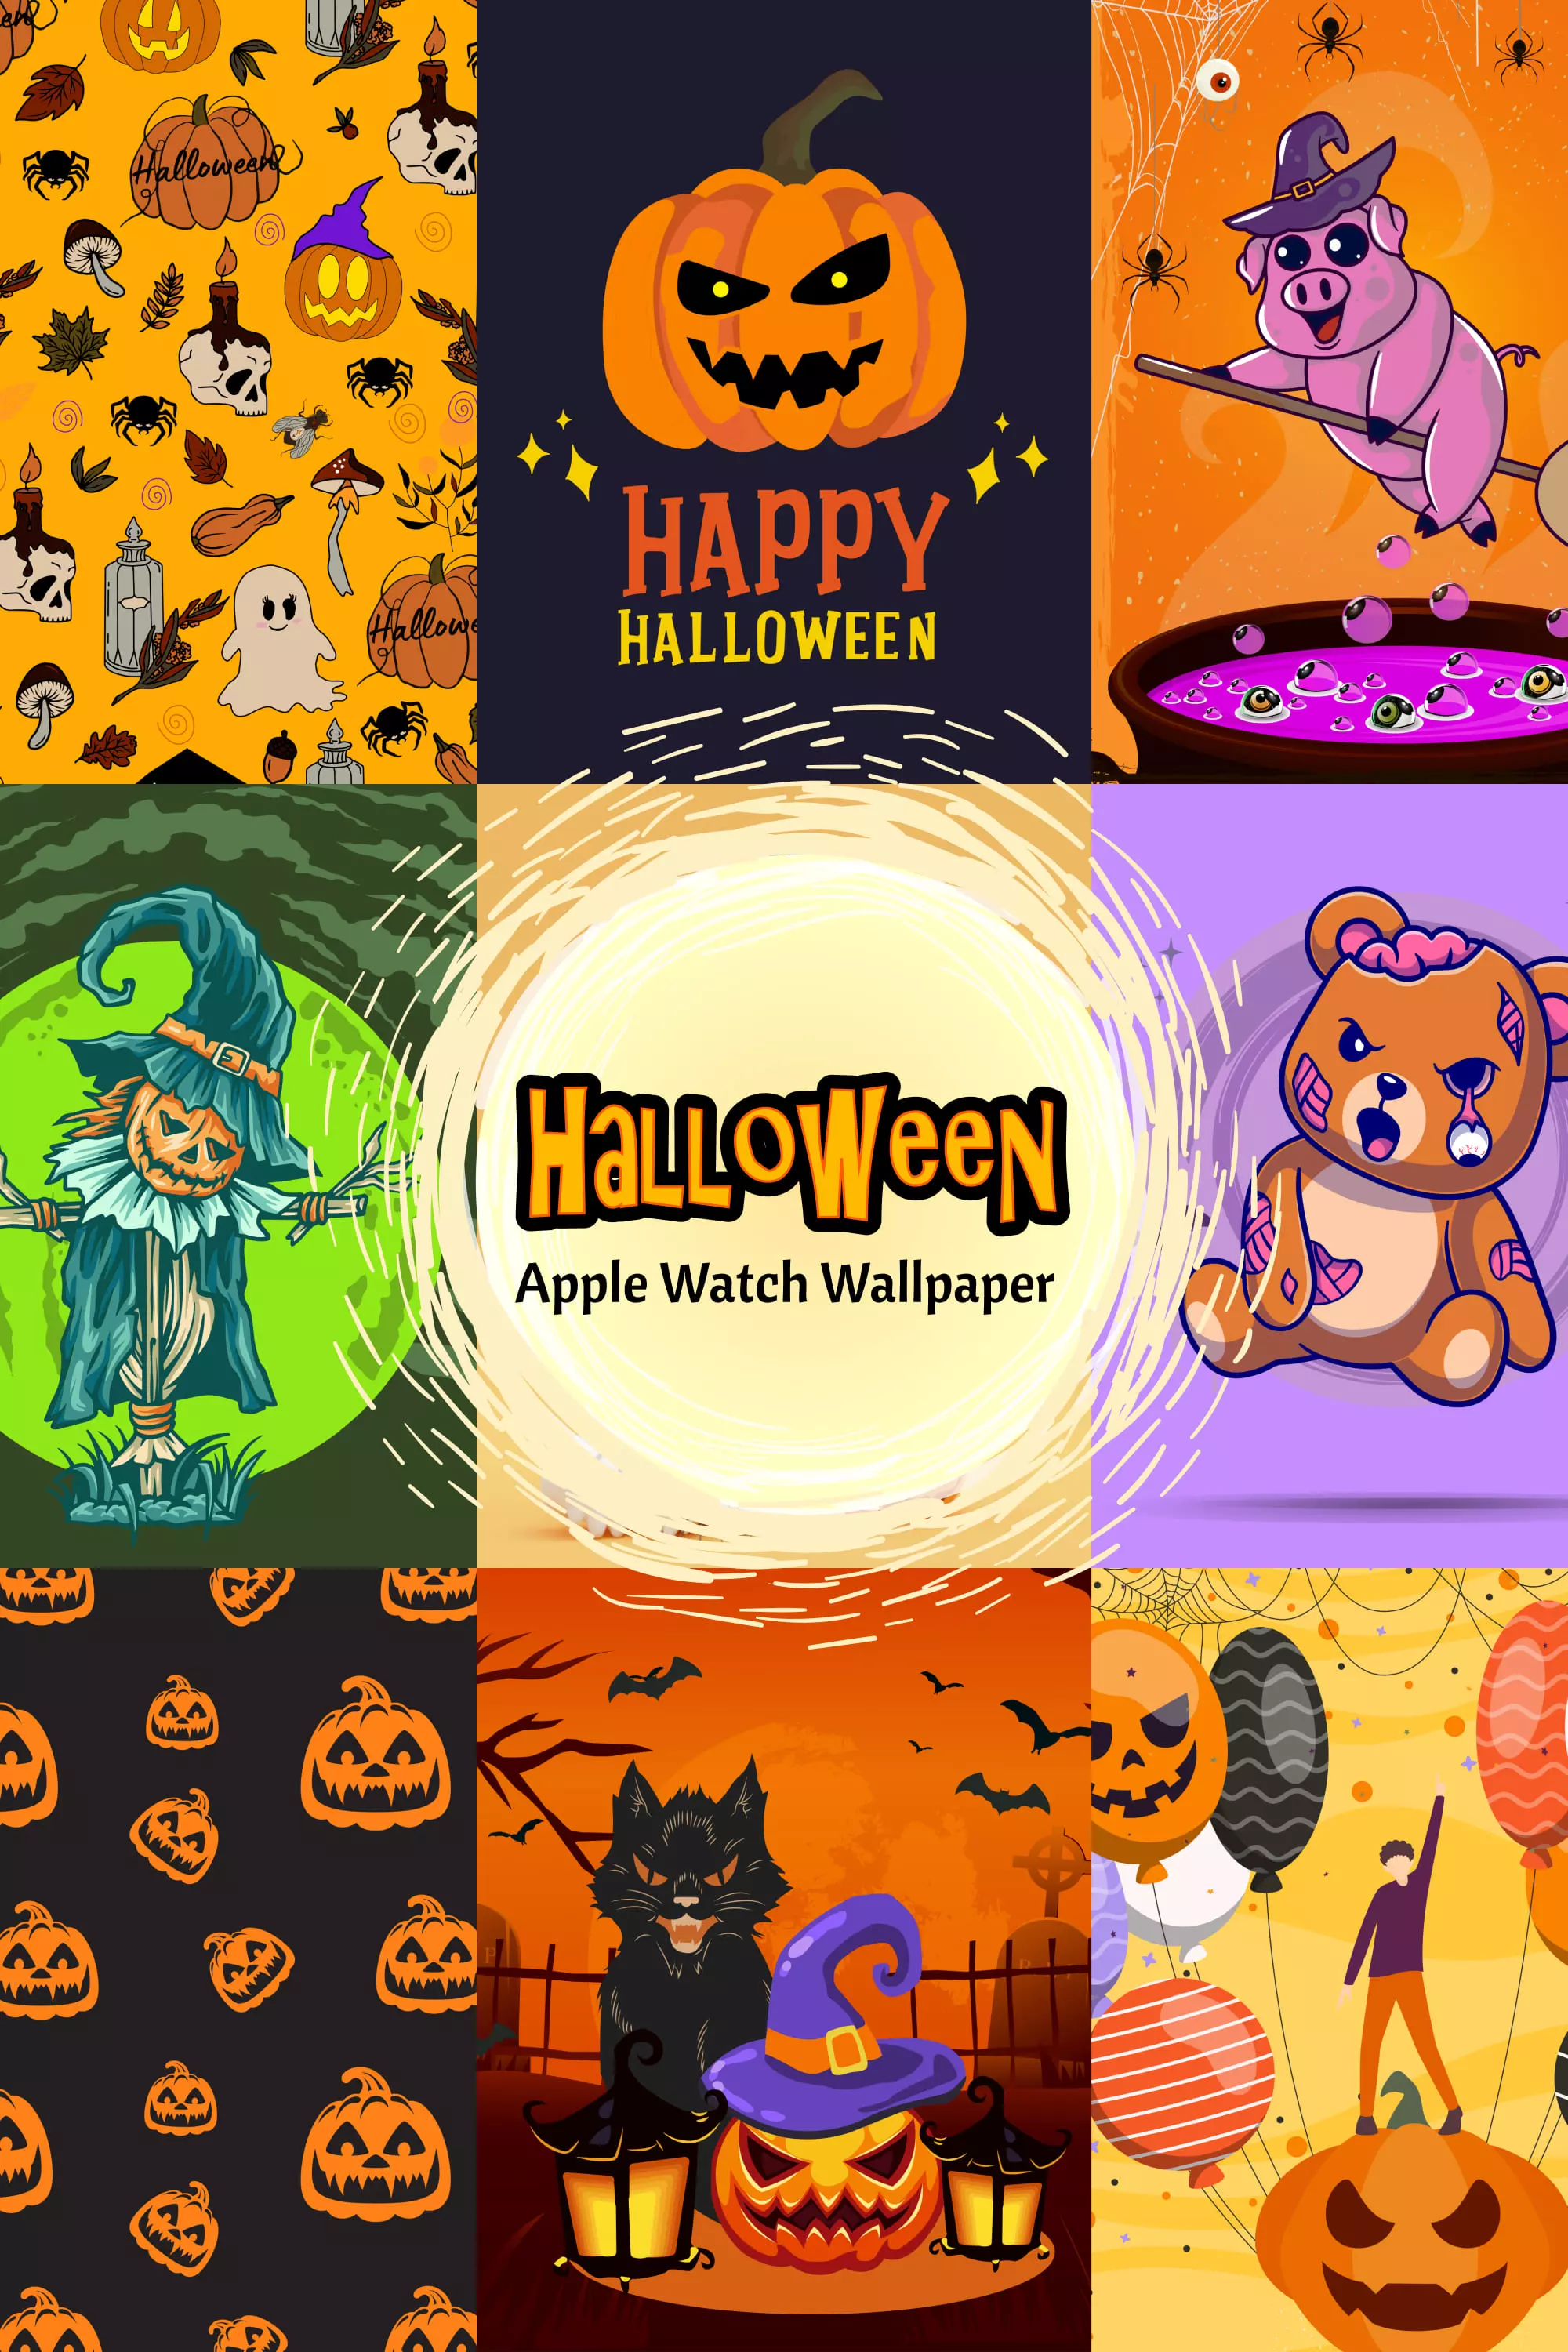 Collage with scary and funny multicolored Halloween apple watch wallpapers.